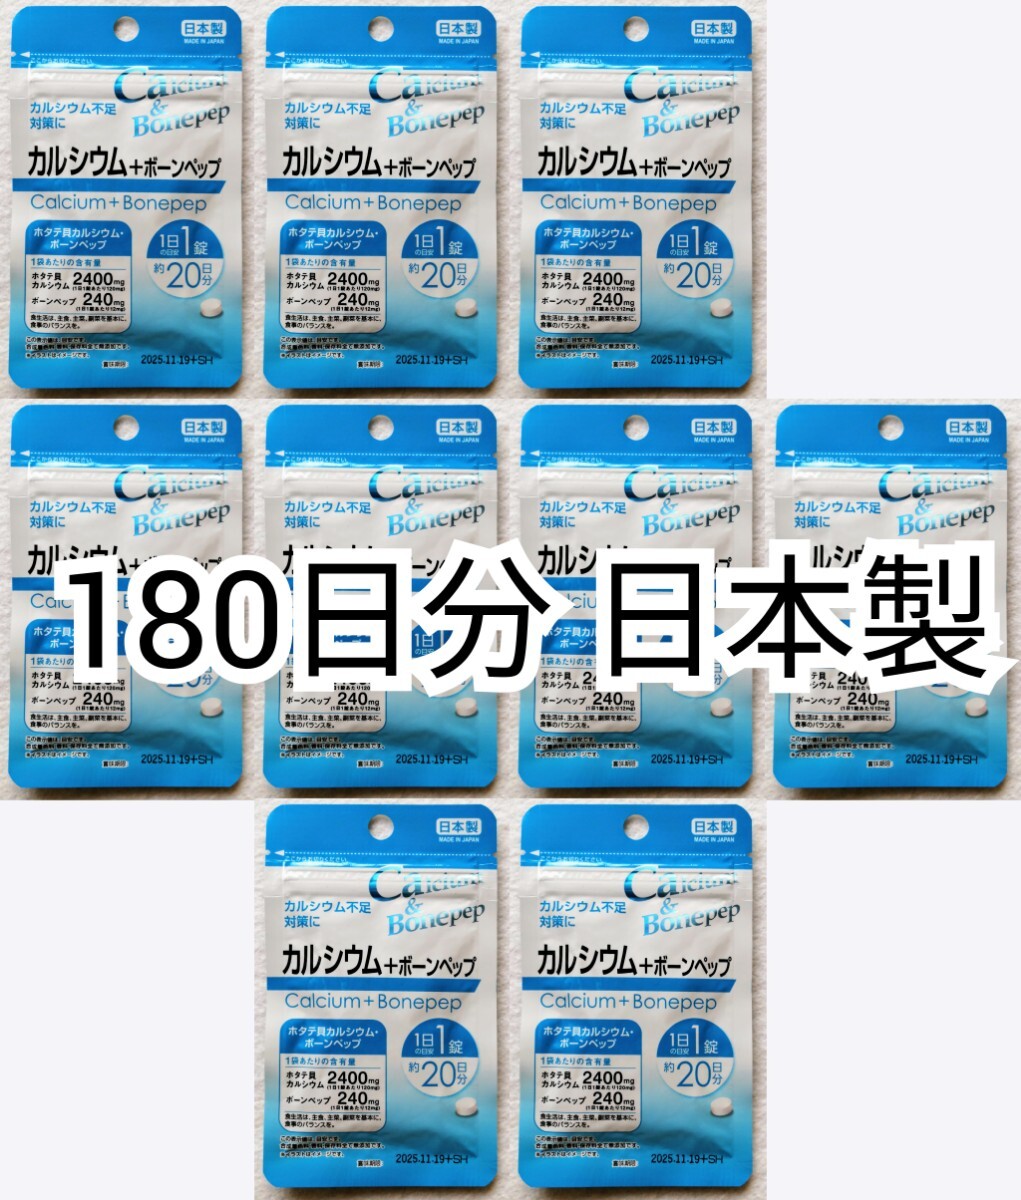  calcium +bo-mpep×9 sack 180 day minute 180 pills (180 bead ) made in Japan no addition supplement ( supplement ) health food .. ..senobita is not waterproof packing 